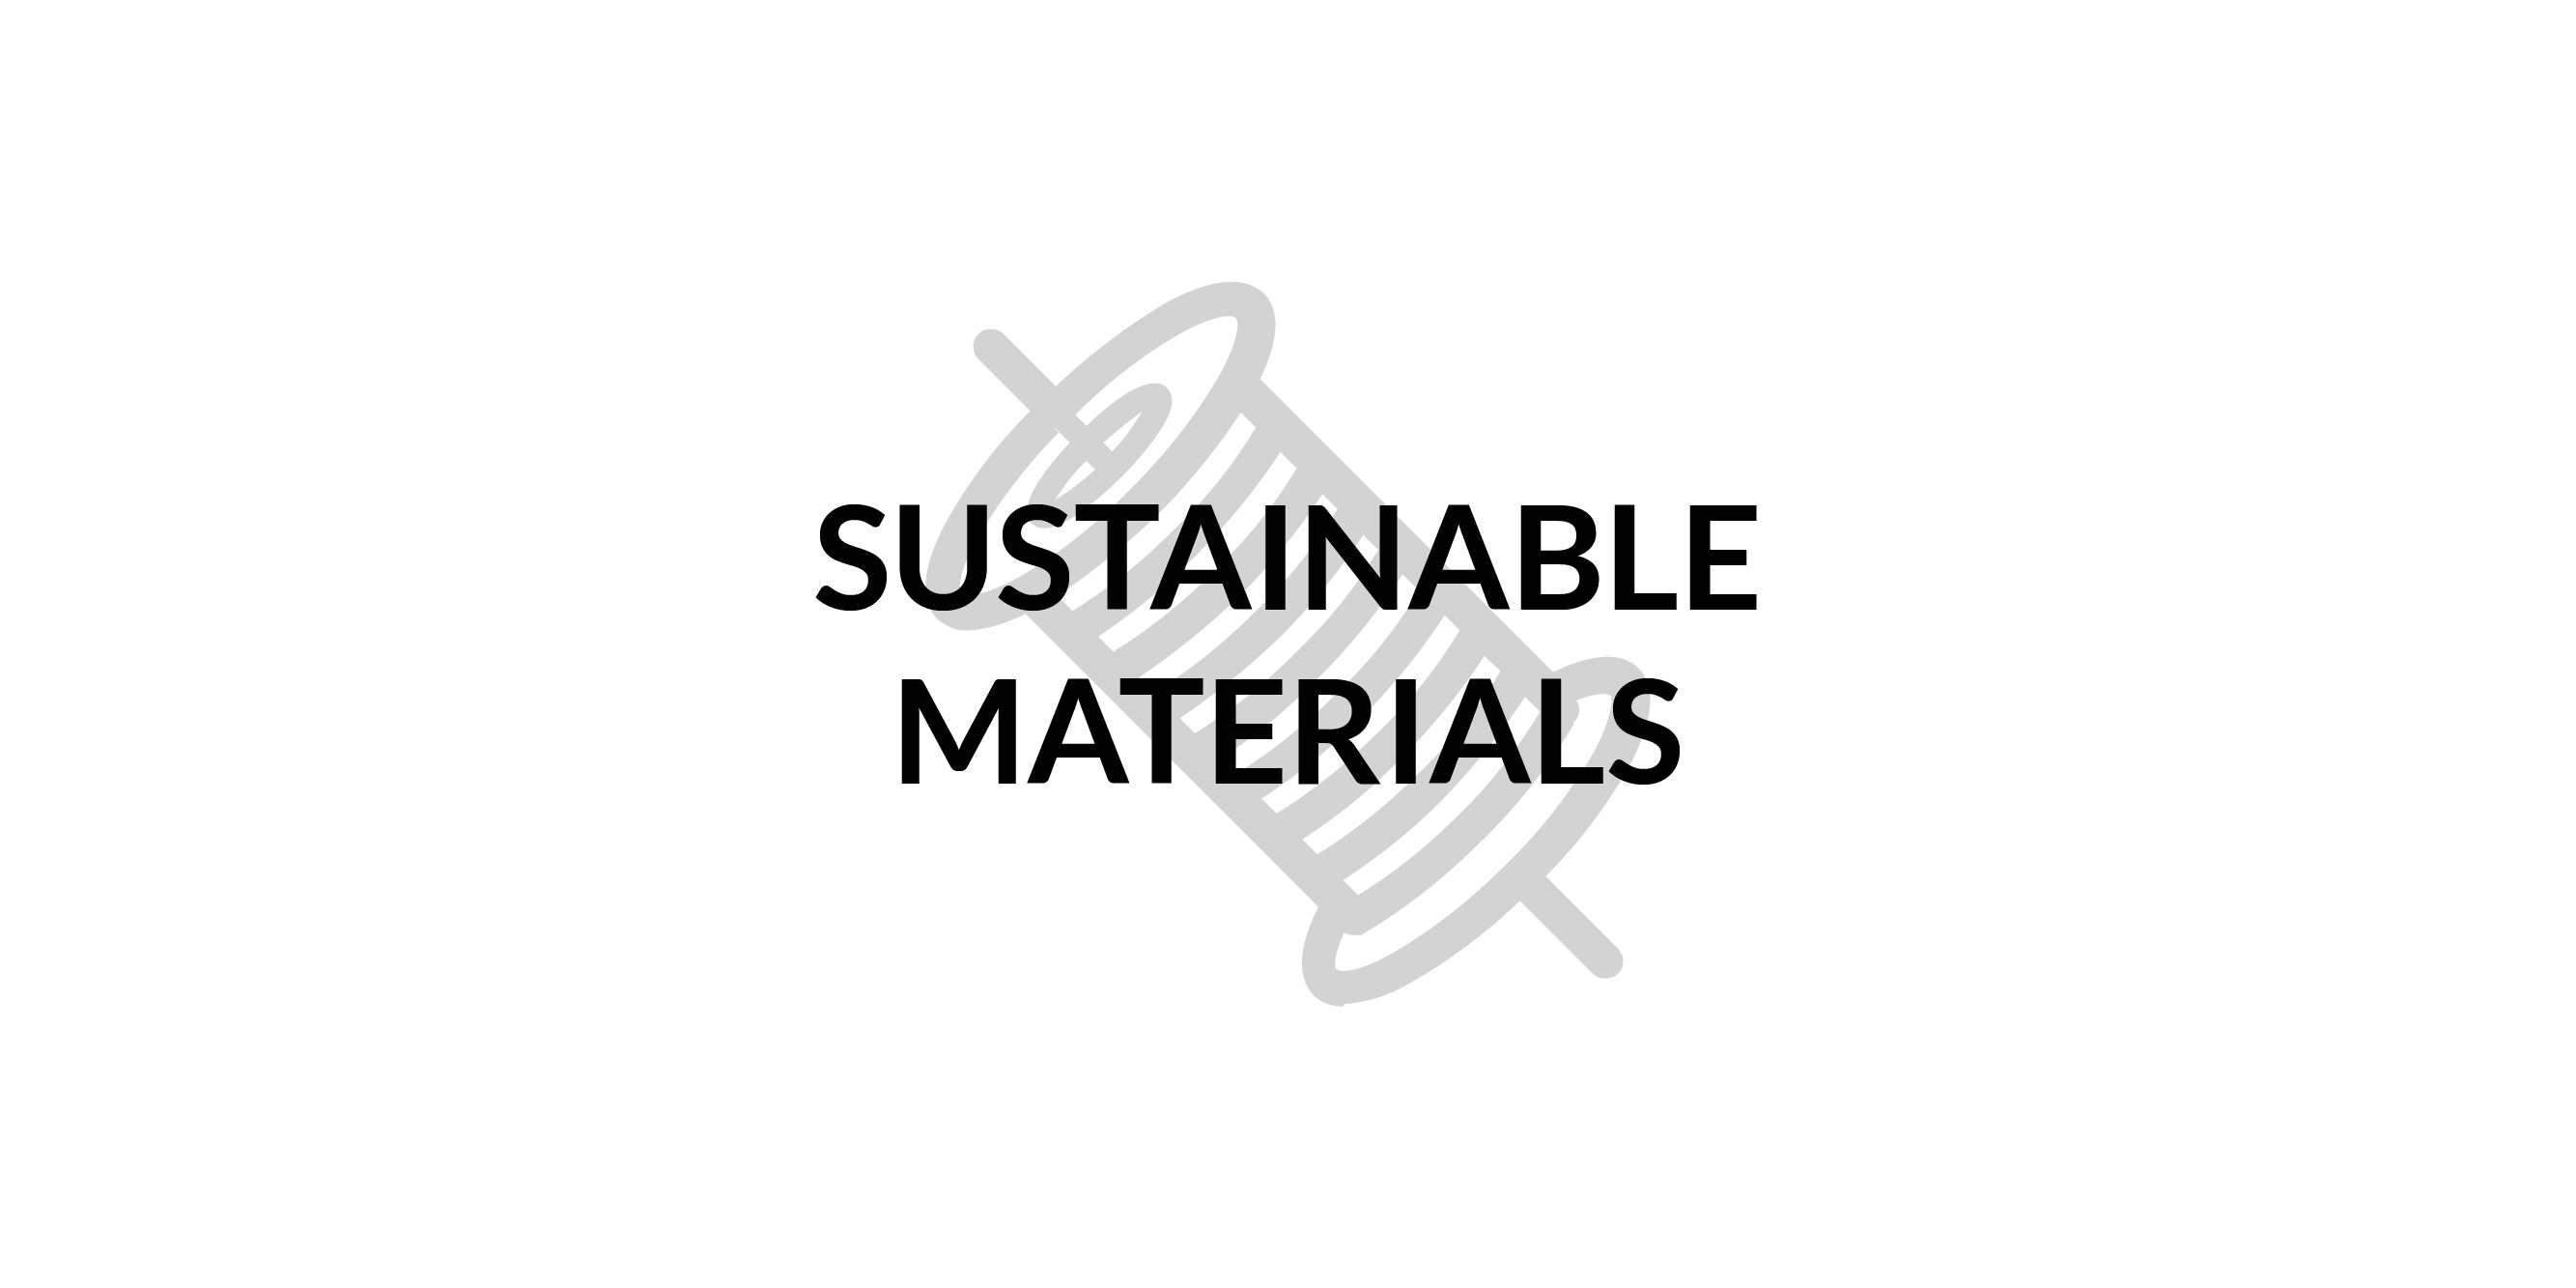 SUSTAINABLE MATERIALS